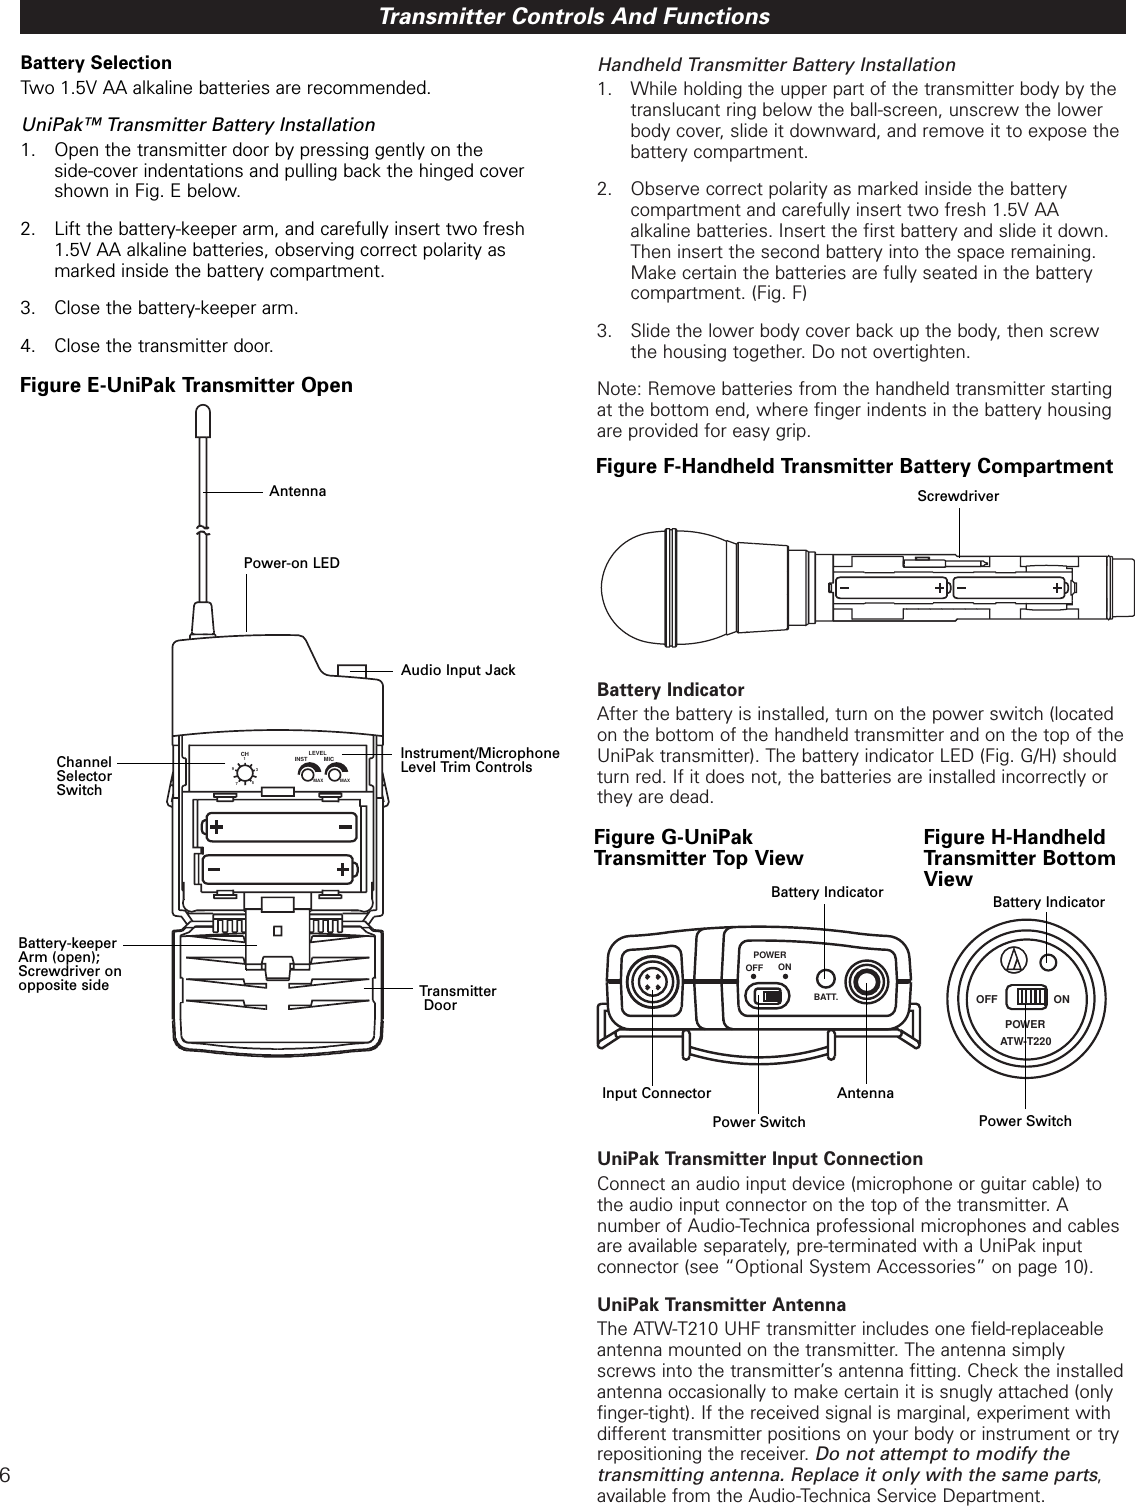 6Handheld Transmitter Battery Installation1. While holding the upper part of the transmitter body by the translucant ring below the ball-screen, unscrew the lower body cover, slide it downward, and remove it to expose the battery compartment.  2. Observe correct polarity as marked inside the battery compartment and carefully insert two fresh 1.5V AA alkaline batteries. Insert the first battery and slide it down. Then insert the second battery into the space remaining. Make certain the batteries are fully seated in the battery compartment. (Fig. F)3. Slide the lower body cover back up the body, then screw the housing together. Do not overtighten. Note: Remove batteries from the handheld transmitter startingat the bottom end, where finger indents in the battery housingare provided for easy grip.  Battery IndicatorAfter the battery is installed, turn on the power switch (locatedon the bottom of the handheld transmitter and on the top of theUniPak transmitter). The battery indicator LED (Fig. G/H) shouldturn red. If it does not, the batteries are installed incorrectly orthey are dead.  UniPak Transmitter Input ConnectionConnect an audio input device (microphone or guitar cable) tothe audio input connector on the top of the transmitter. A number of Audio-Technica professional microphones and cablesare available separately, pre-terminated with a UniPak input connector (see “Optional System Accessories” on page 10).UniPak Transmitter AntennaThe ATW-T210 UHF transmitter includes one field-replaceableantenna mounted on the transmitter. The antenna simplyscrews into the transmitter’s antenna fitting. Check the installedantenna occasionally to make certain it is snugly attached (onlyfinger-tight). If the received signal is marginal, experiment withdifferent transmitter positions on your body or instrument or tryrepositioning the receiver. Do not attempt to modify the transmitting antenna. Replace it only with the same parts,available from the Audio-Technica Service Department.  Transmitter Controls And FunctionsBattery SelectionTwo 1.5V AA alkaline batteries are recommended. UniPak™ Transmitter Battery Installation1. Open the transmitter door by pressing gently on the side-cover indentations and pulling back the hinged cover shown in Fig. E below.2. Lift the battery-keeper arm, and carefully insert two fresh 1.5V AA alkaline batteries, observing correct polarity as marked inside the battery compartment. 3. Close the battery-keeper arm. 4. Close the transmitter door.MAXMICMAXINSTCH13579LEVELTransmitterDoorFigure E-UniPak Transmitter OpenAntennaAudio Input JackInstrument/MicrophoneLevel Trim ControlsChannel SelectorSwitchBattery-keeperArm (open);Screwdriver onopposite sidePower-on LEDFigure F-Handheld Transmitter Battery CompartmentScrewdriverOFF ONPOWERBATT.OFF ONPOWERATW-T220Figure G-UniPak Transmitter Top ViewFigure H-HandheldTransmitter BottomViewInput ConnectorPower SwitchBattery IndicatorAntennaPower SwitchBattery Indicator